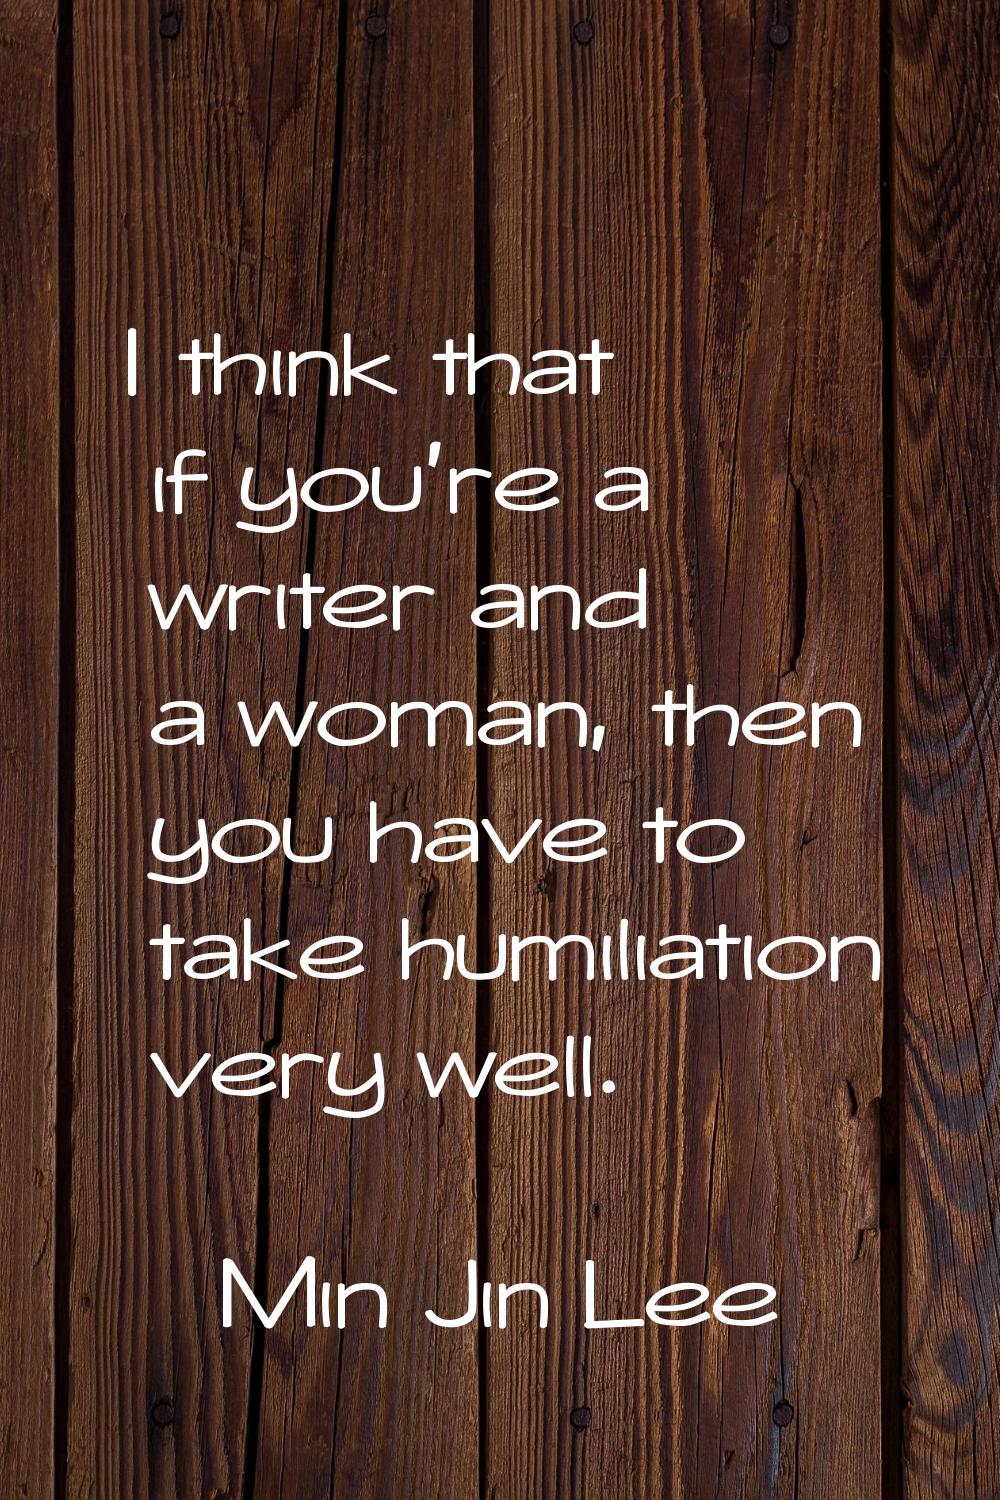 I think that if you're a writer and a woman, then you have to take humiliation very well.